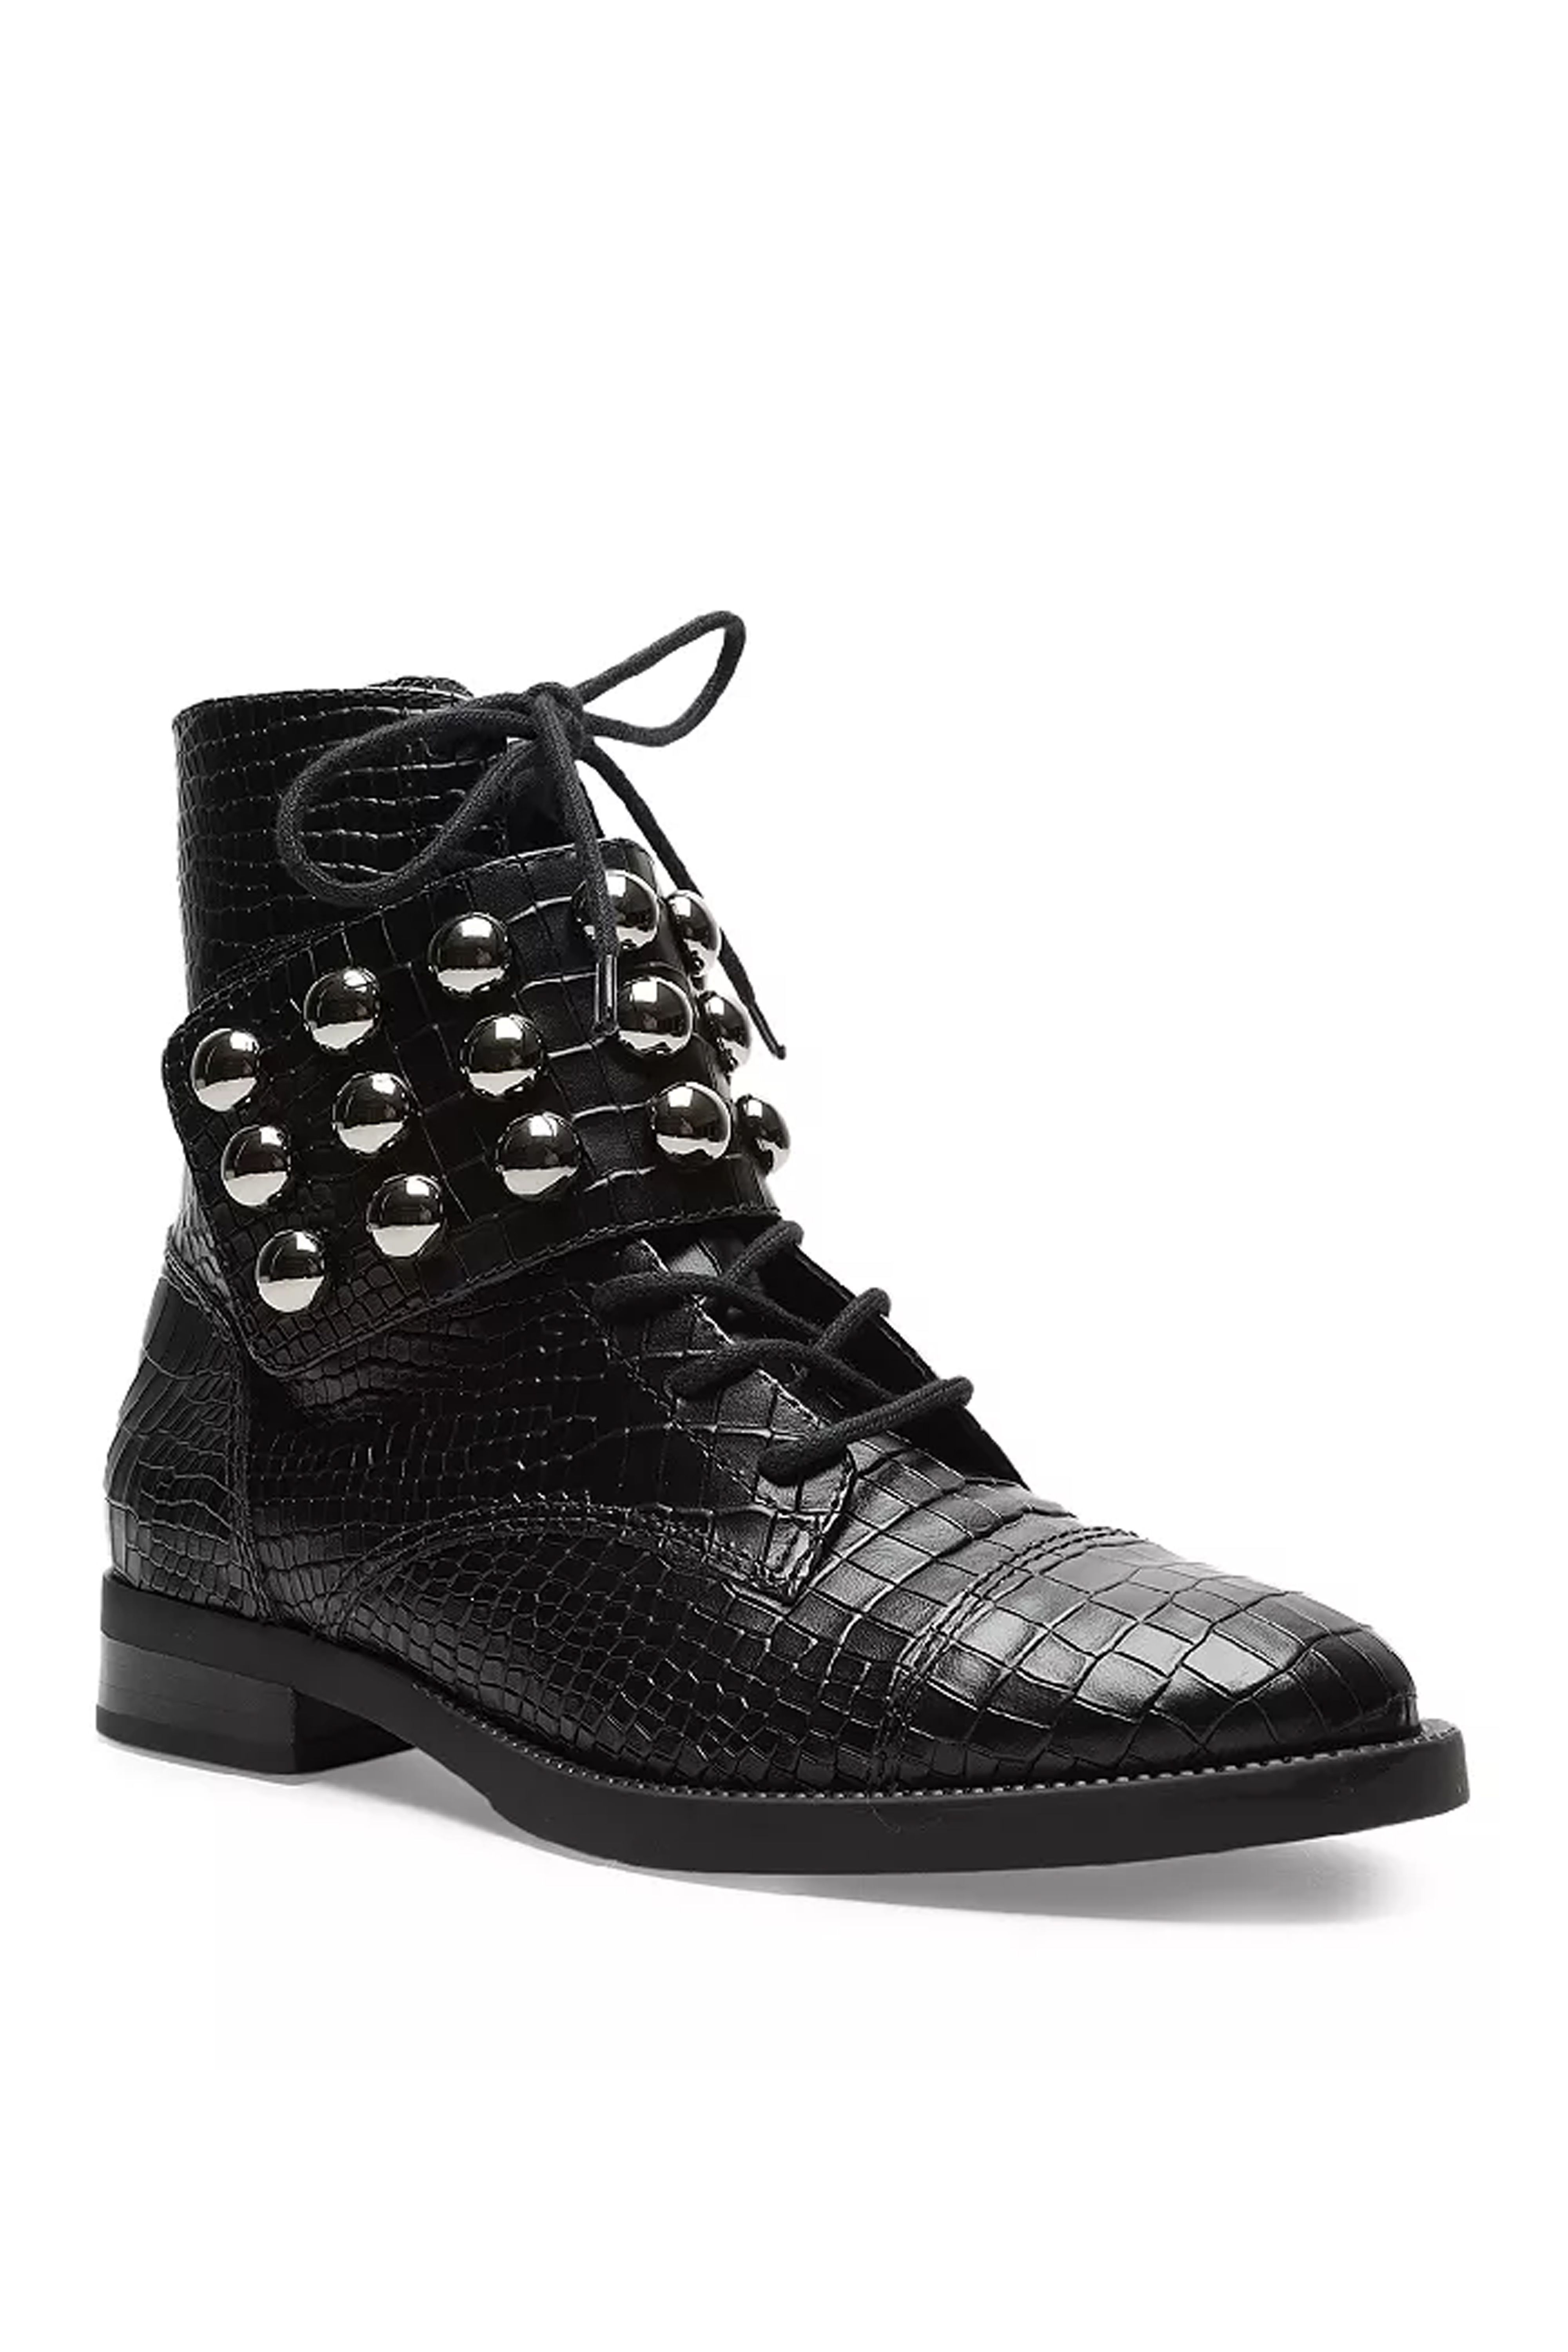 stylish tactical boots